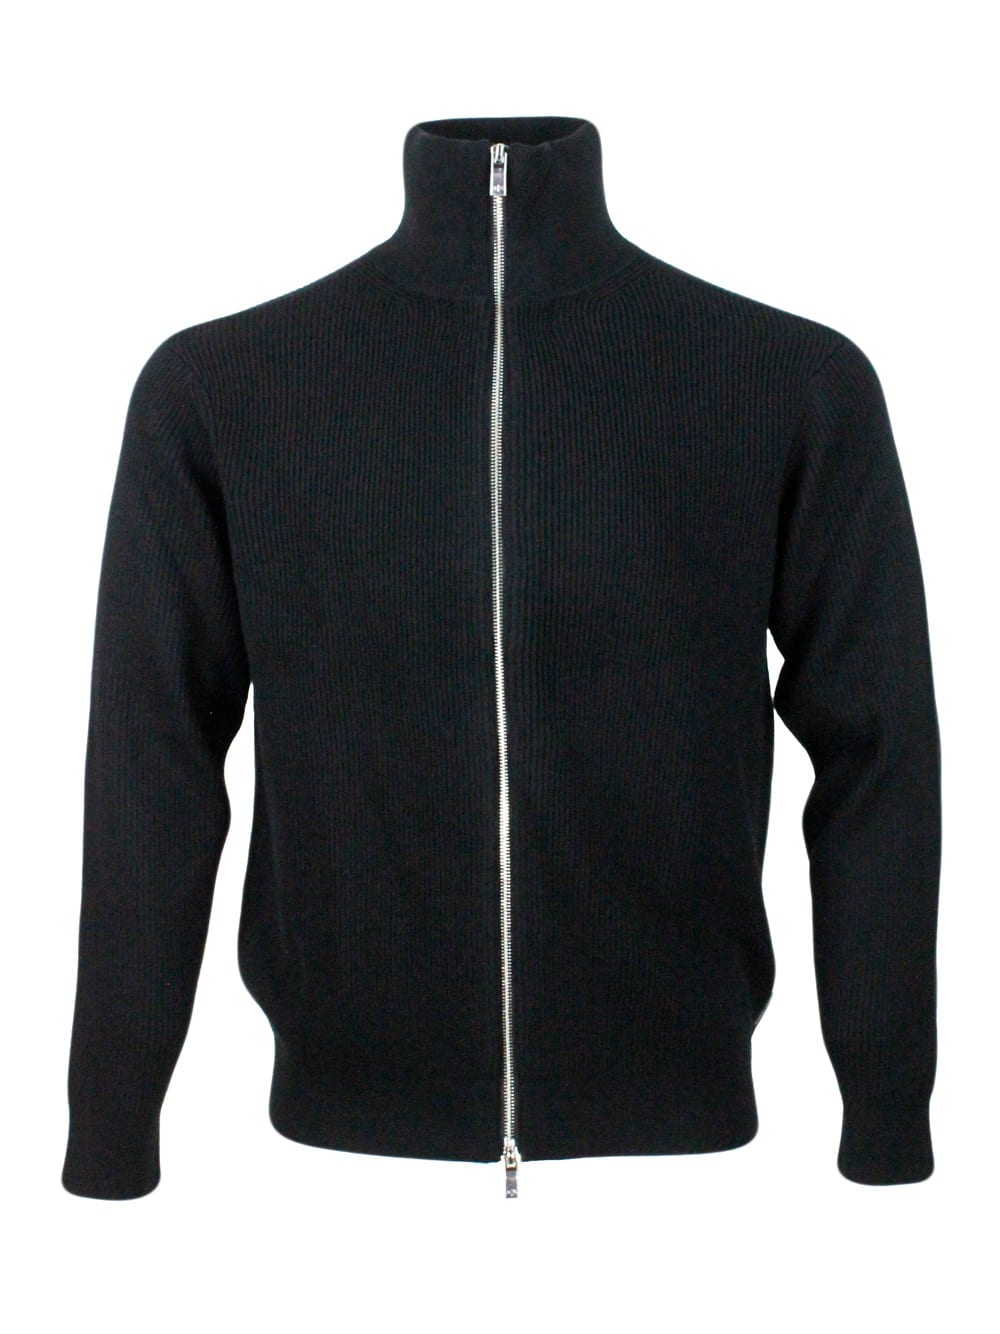 ARMANI EXCHANGE FULL ZIP CARDIGAN SWEATER WITH ENGLISH RIB KNIT IN WOOL AND COTTON BLEND